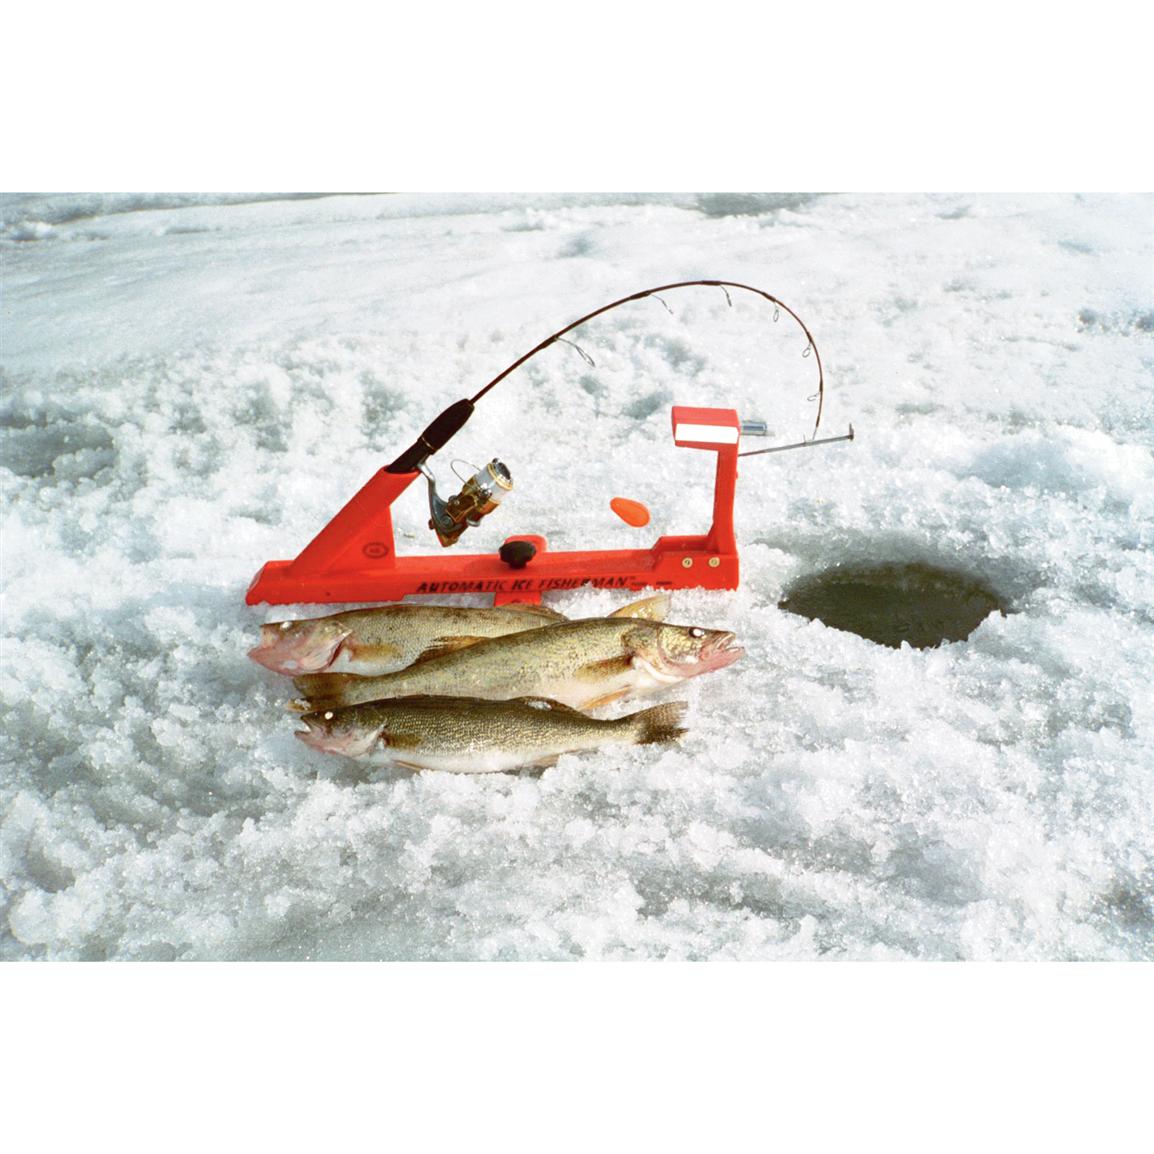 Automatic Ice Fisherman™ 25841, Ice Fishing Tip Ups at